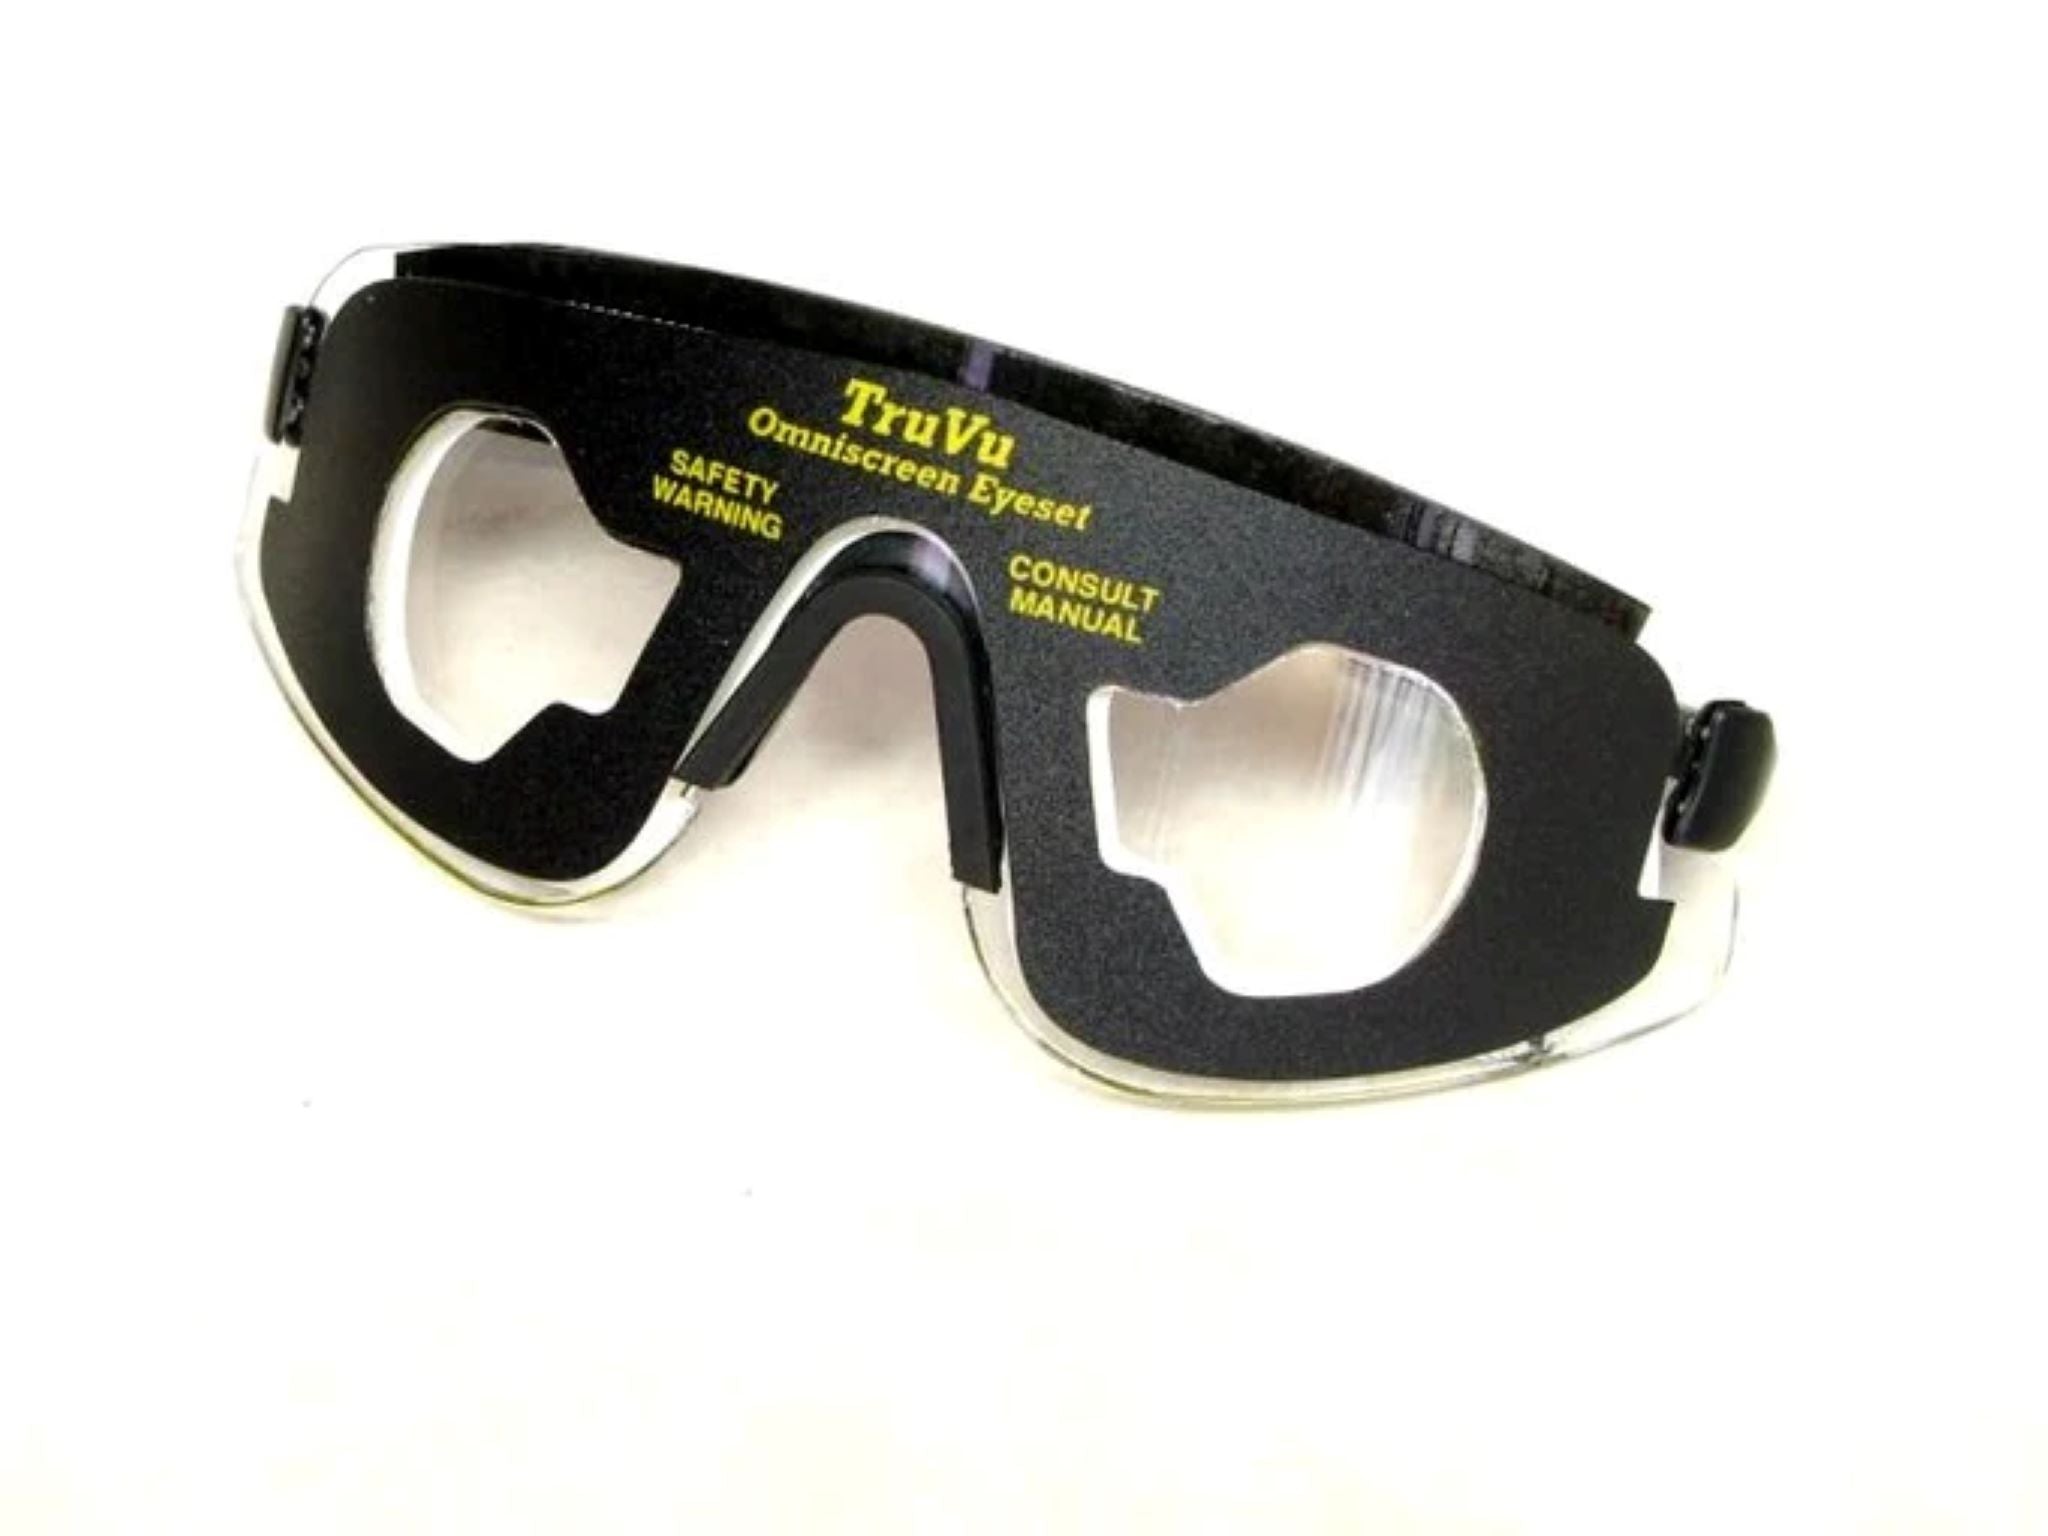 View-Through Eyesets for Schools